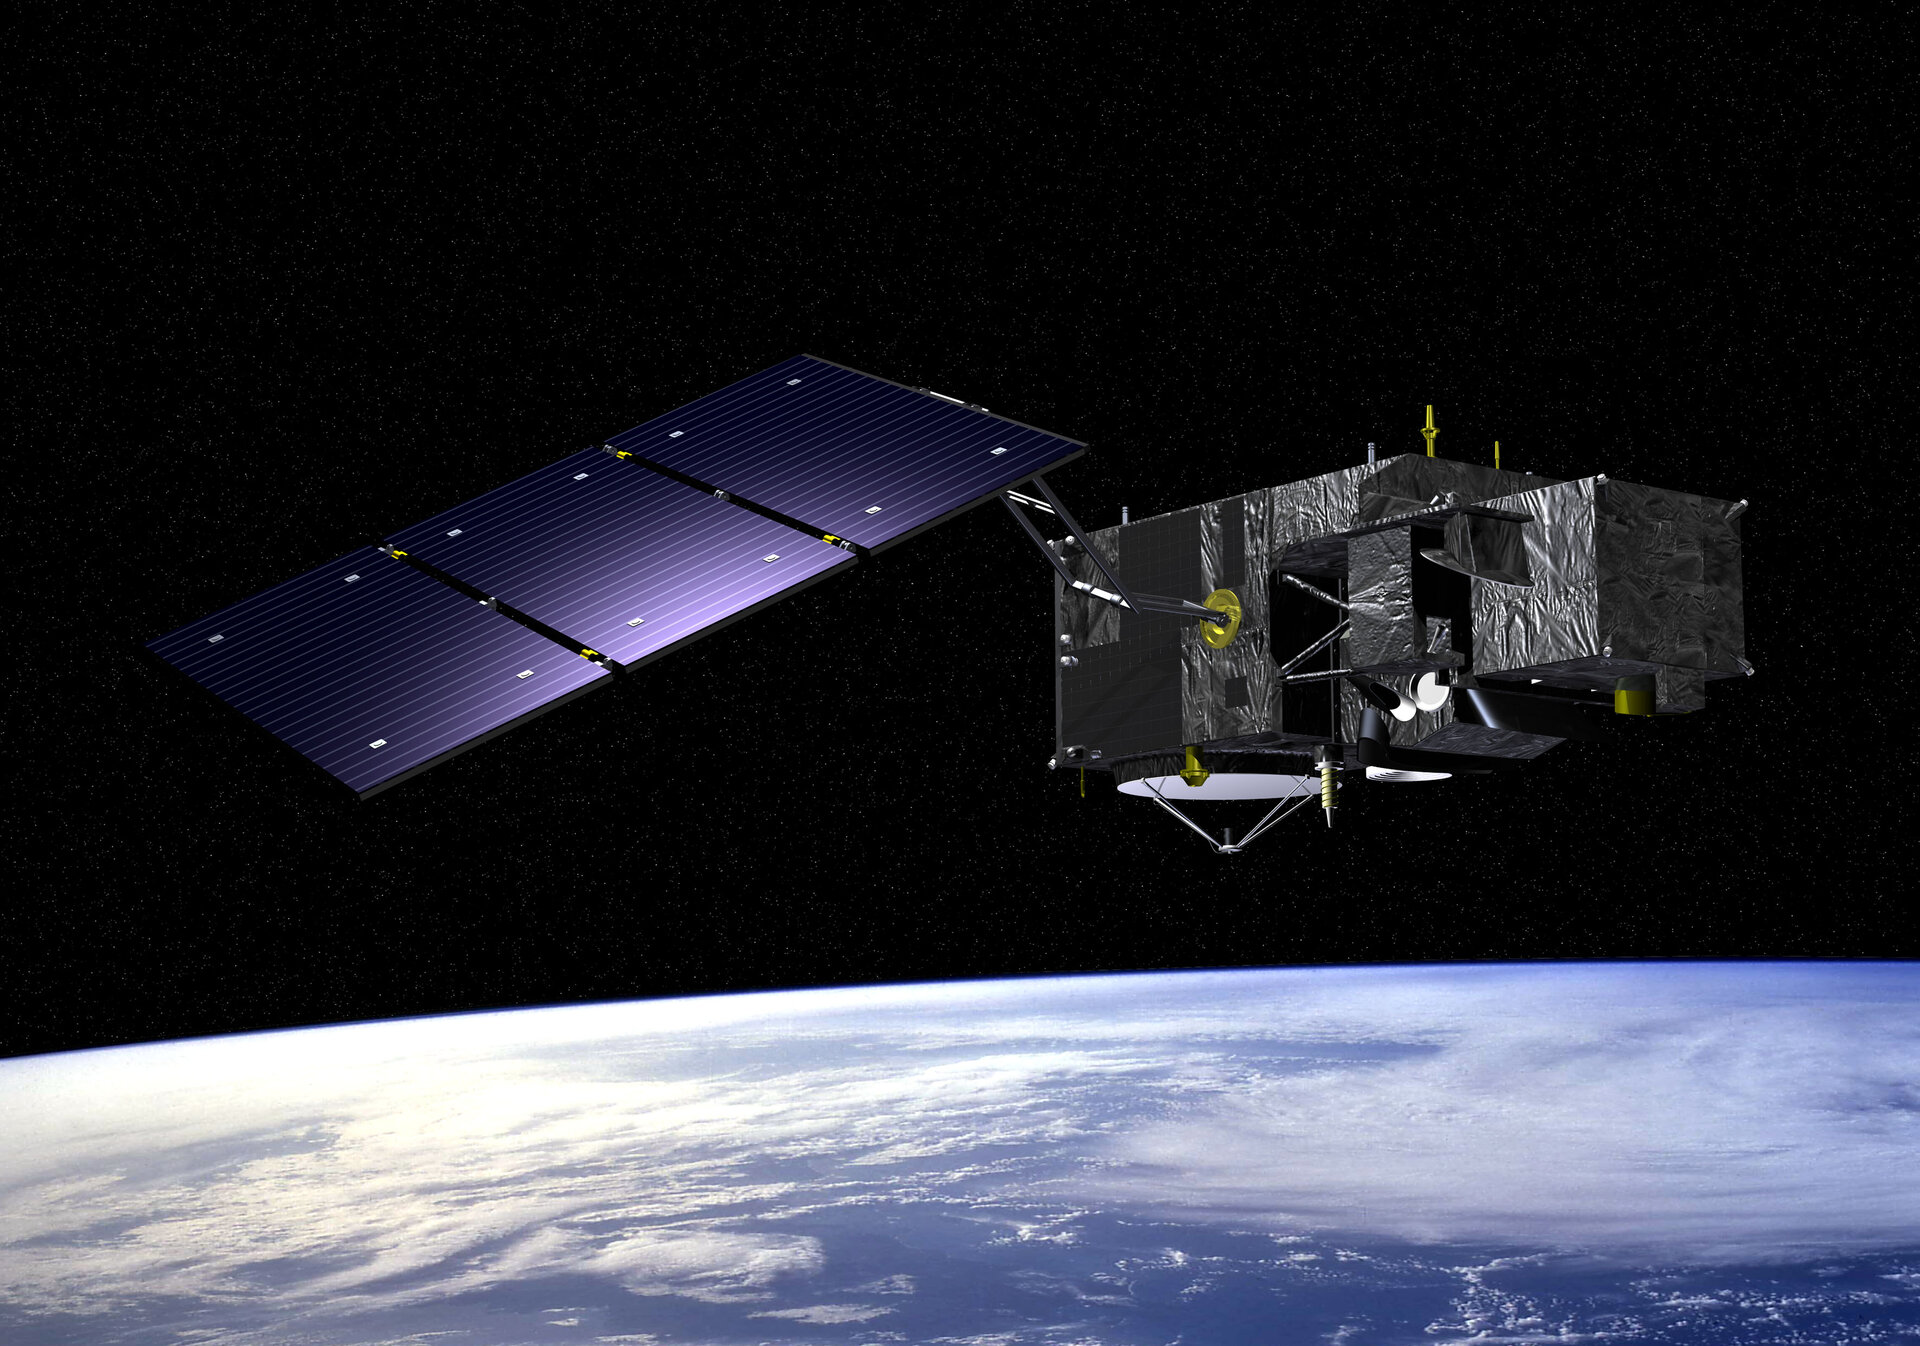 Part of the GMES Space Component, the Sentinel-3 satellite